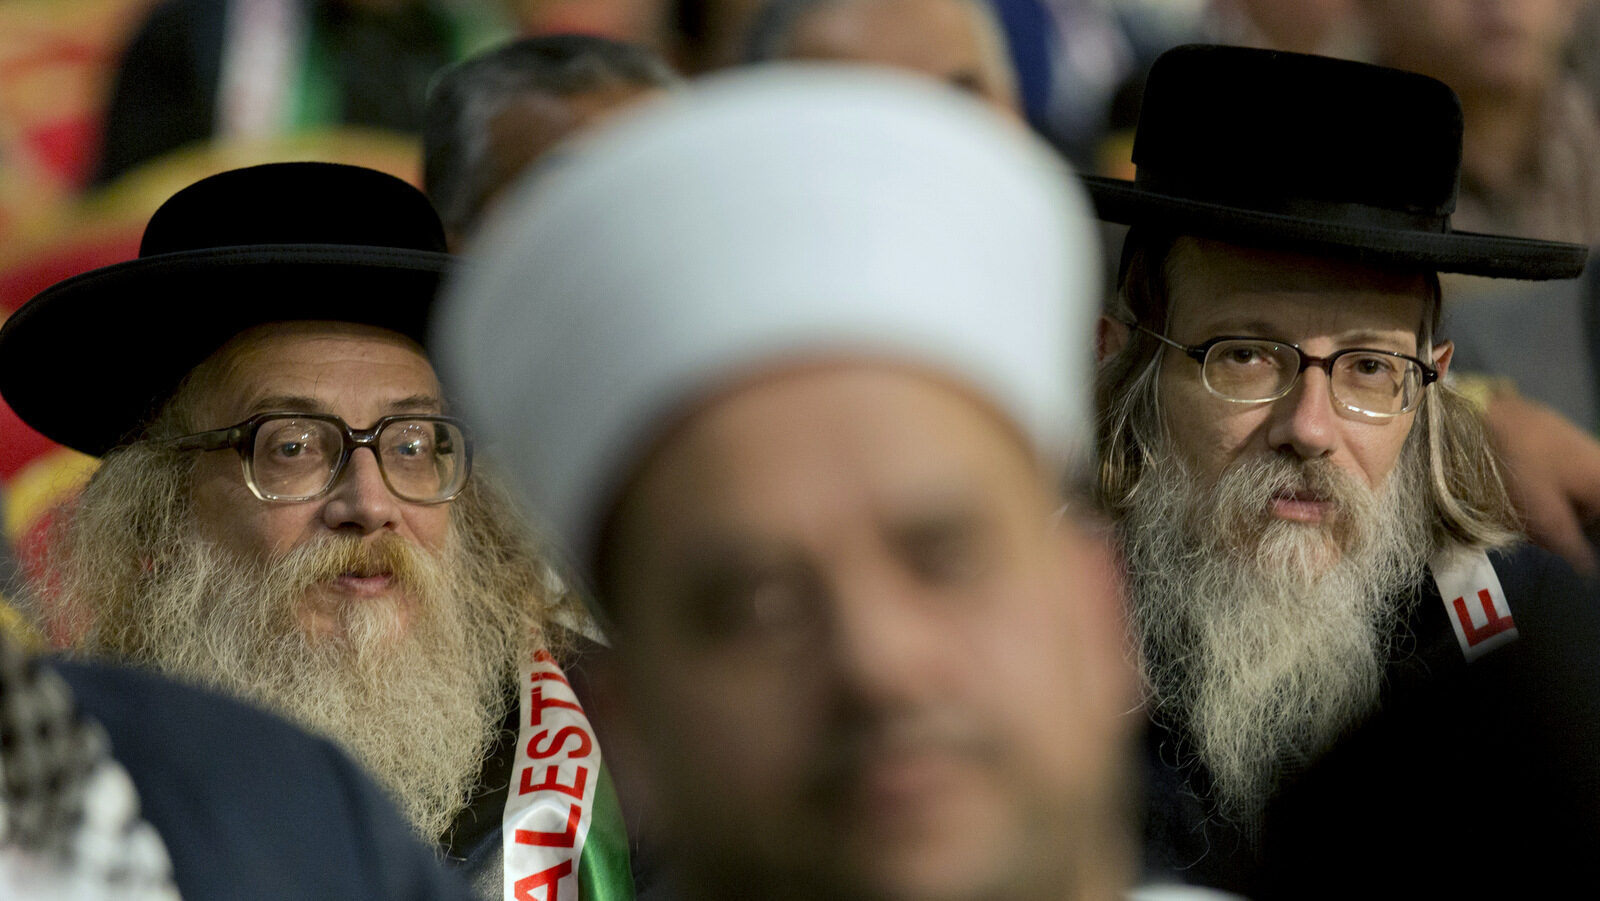 Jewish Rabbis and Muslim clerics attend the opening session of the Fatah party conference, in the West Bank city of Ramallah, Tuesday, Nov. 29, 2016. Palestinian Fatah movement holds its seventh conference in Ramallah with some fourteen hundred members participating and led by Palestinian President Mahmoud Abbas. The conference is to elect the party's two main decision making bodies. (AP Photo/Nasser Nasser)